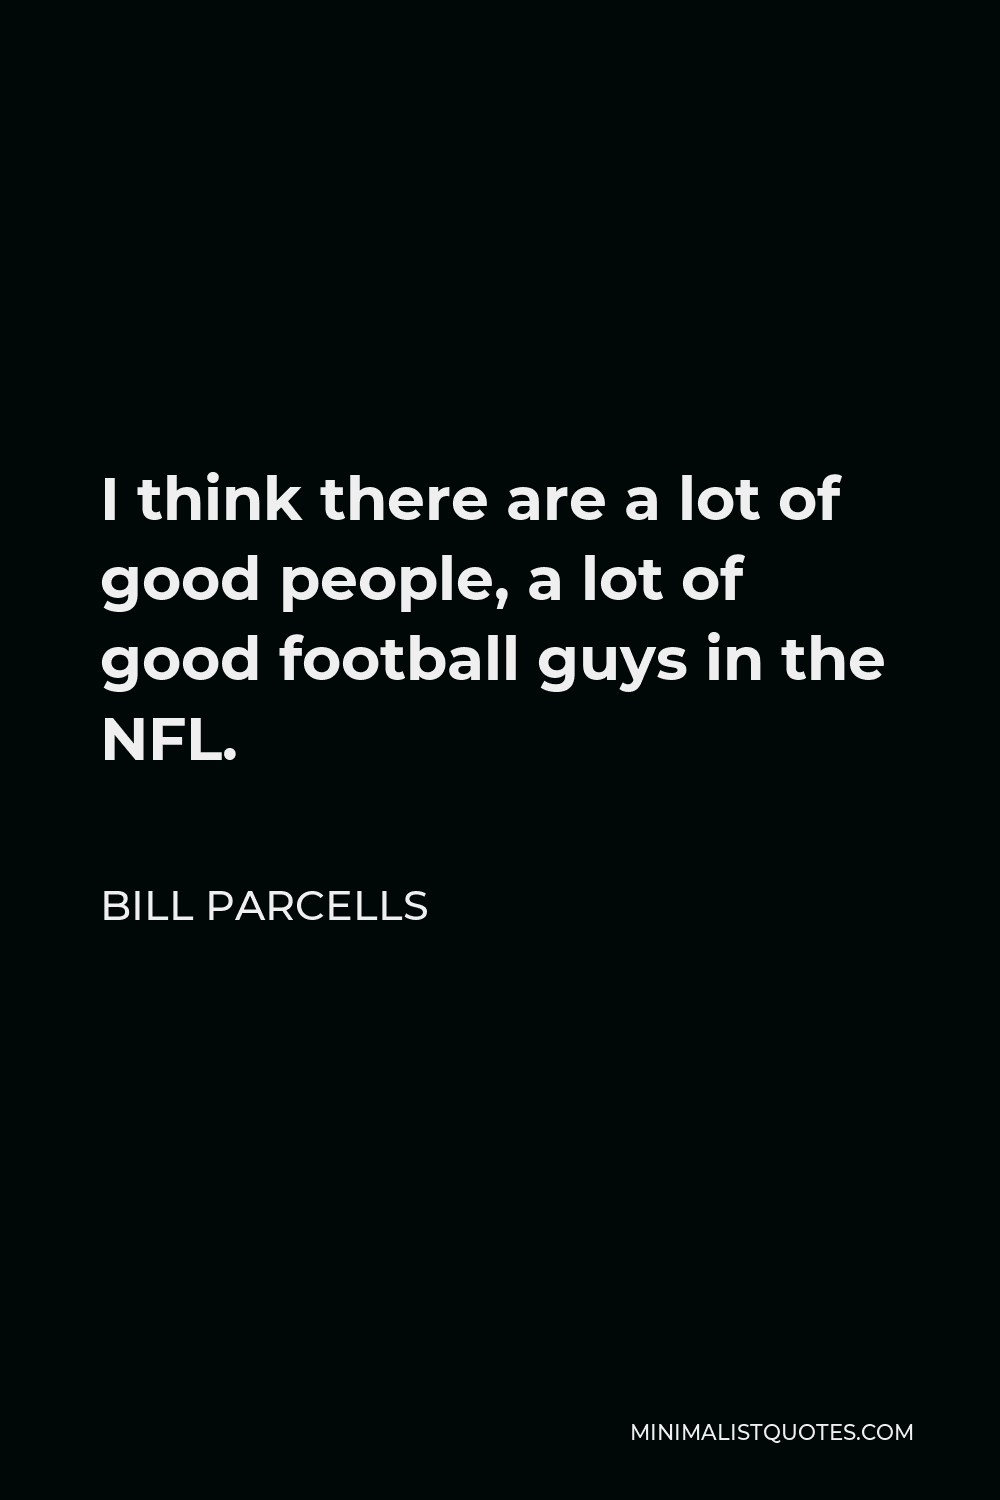 Bill Parcells Quote - I think there are a lot of good people, a lot of good football guys in the NFL.